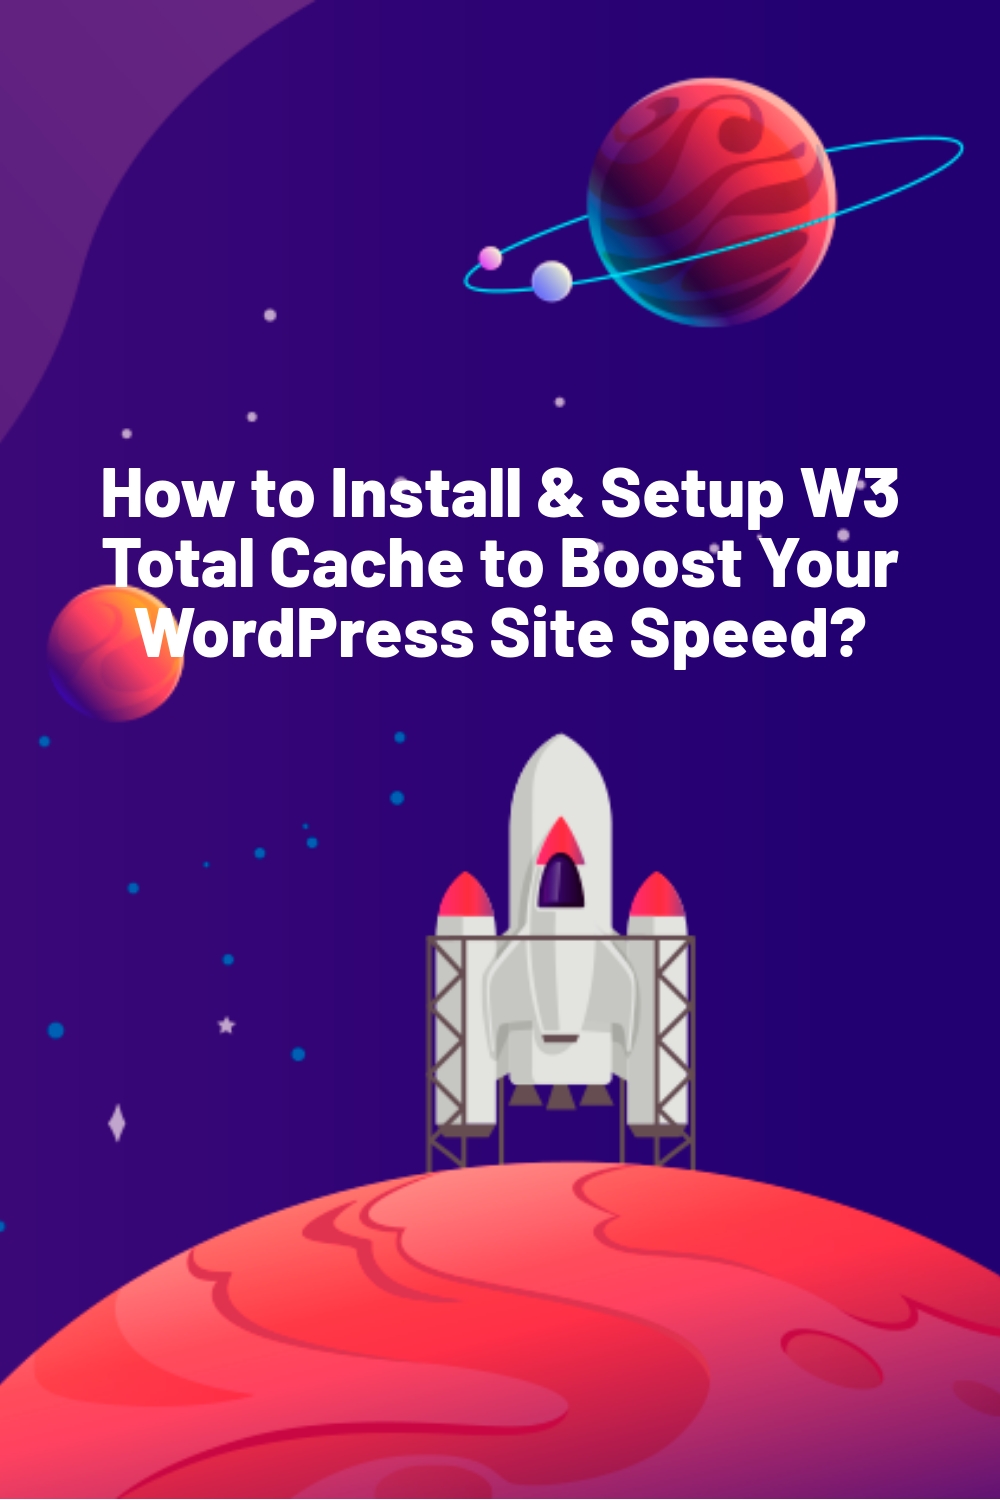 How to Install & Setup W3 Total Cache to Boost Your WordPress Site Speed?